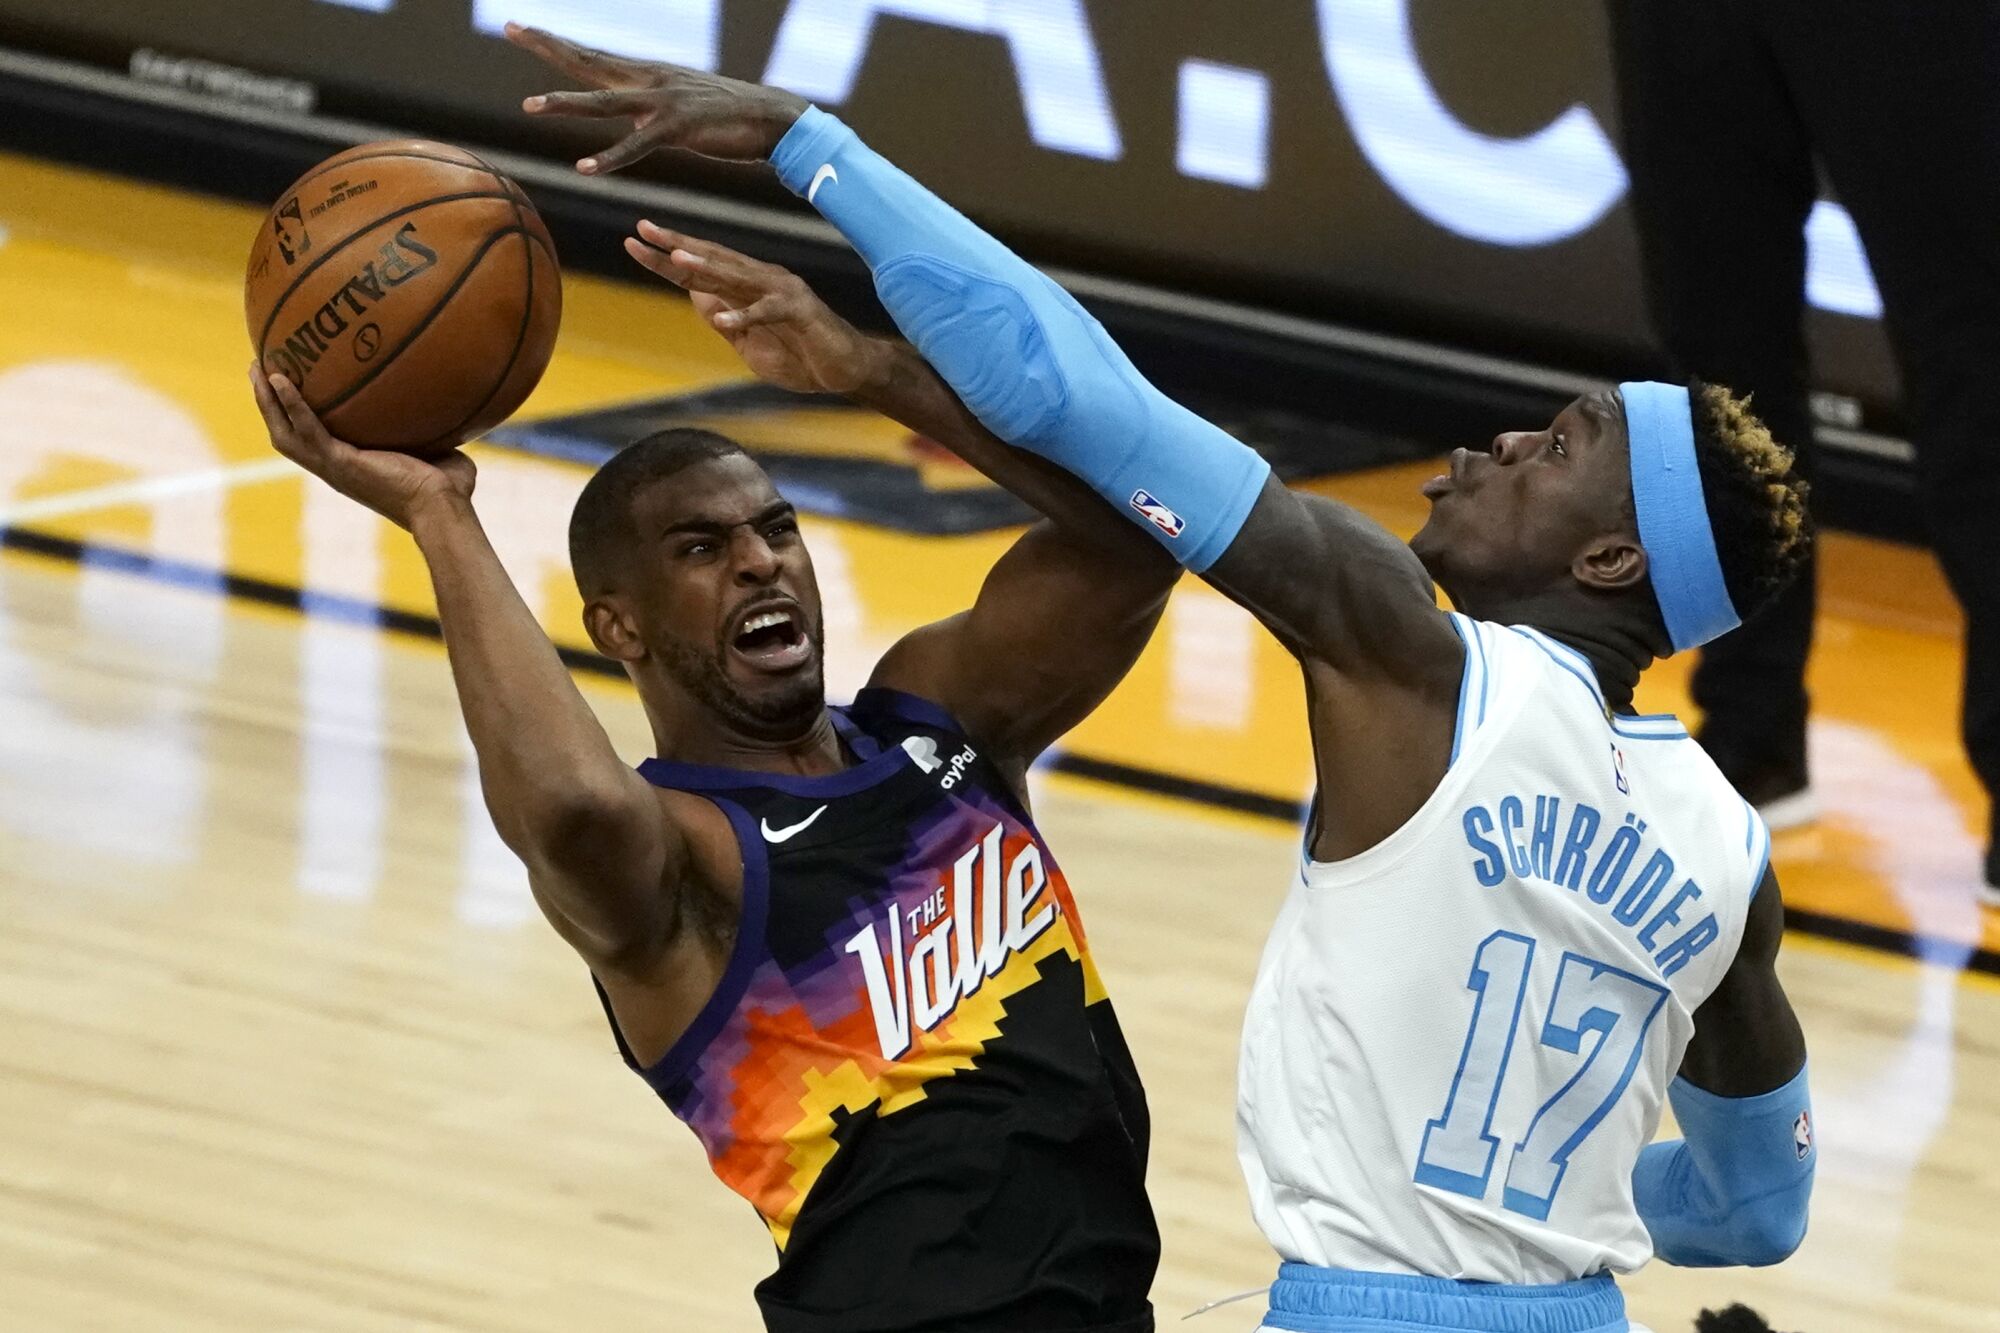 Suns guard Chris Paul gets fouled Lakers guard Dennis Schroder on a shot in the lane.